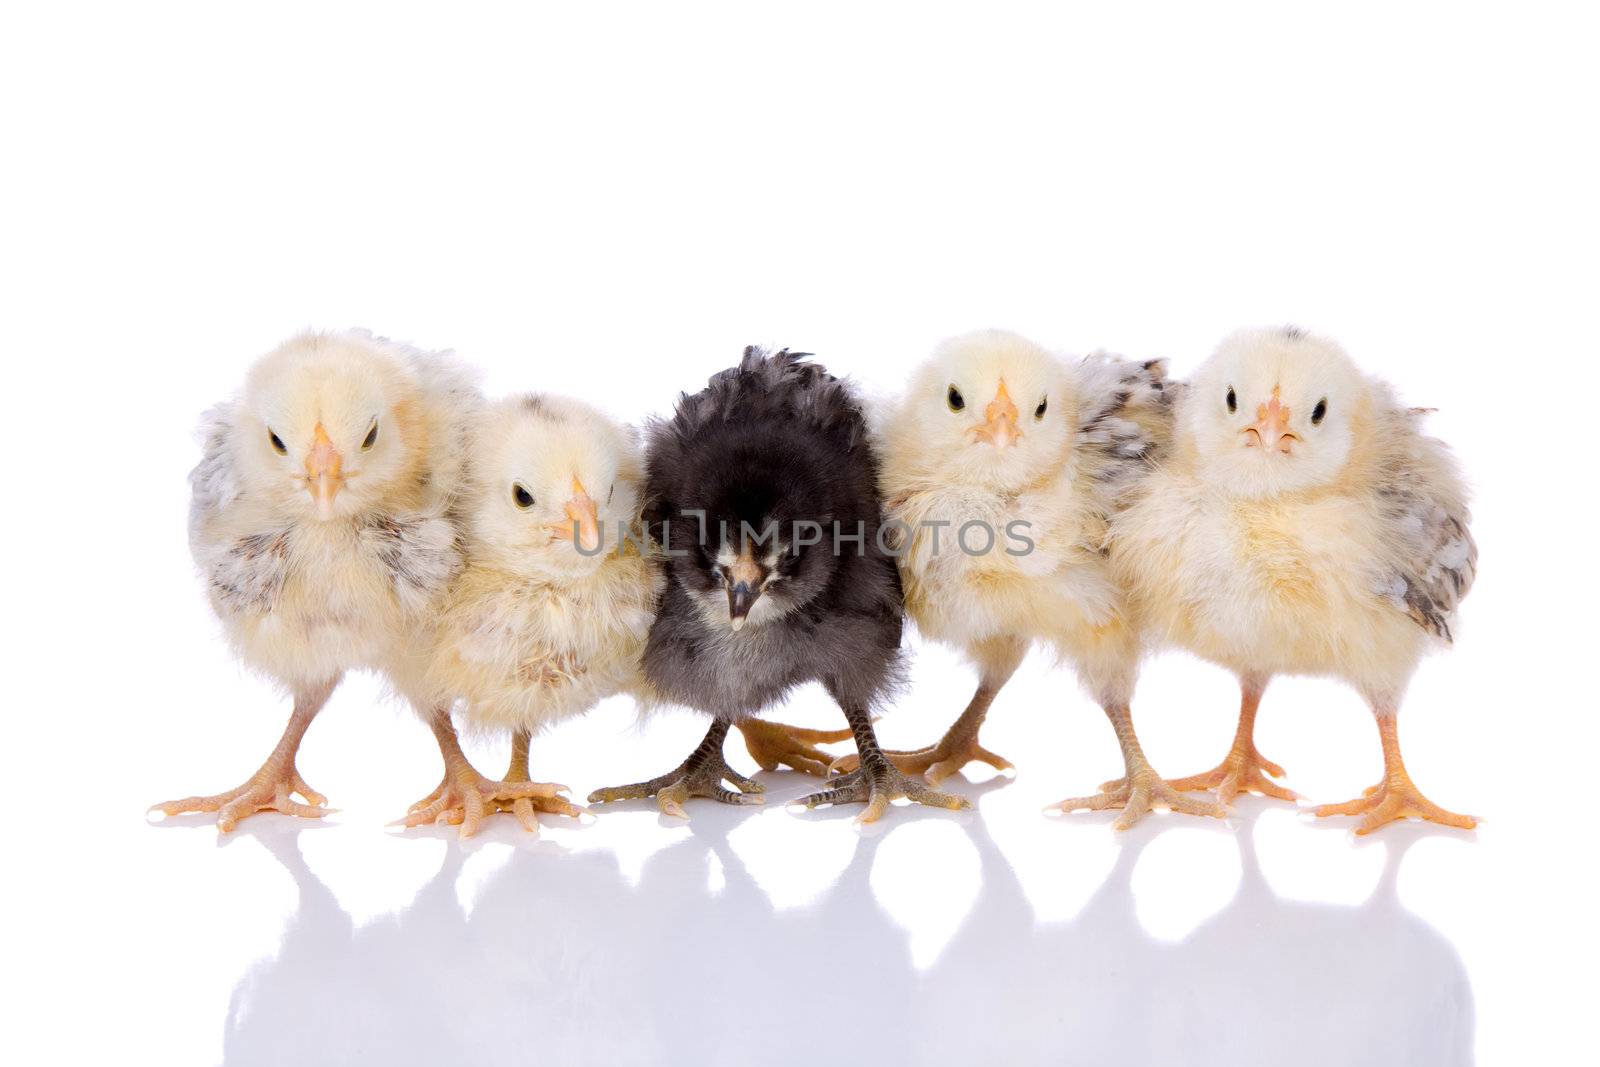 Cute little chickens in a row on white background